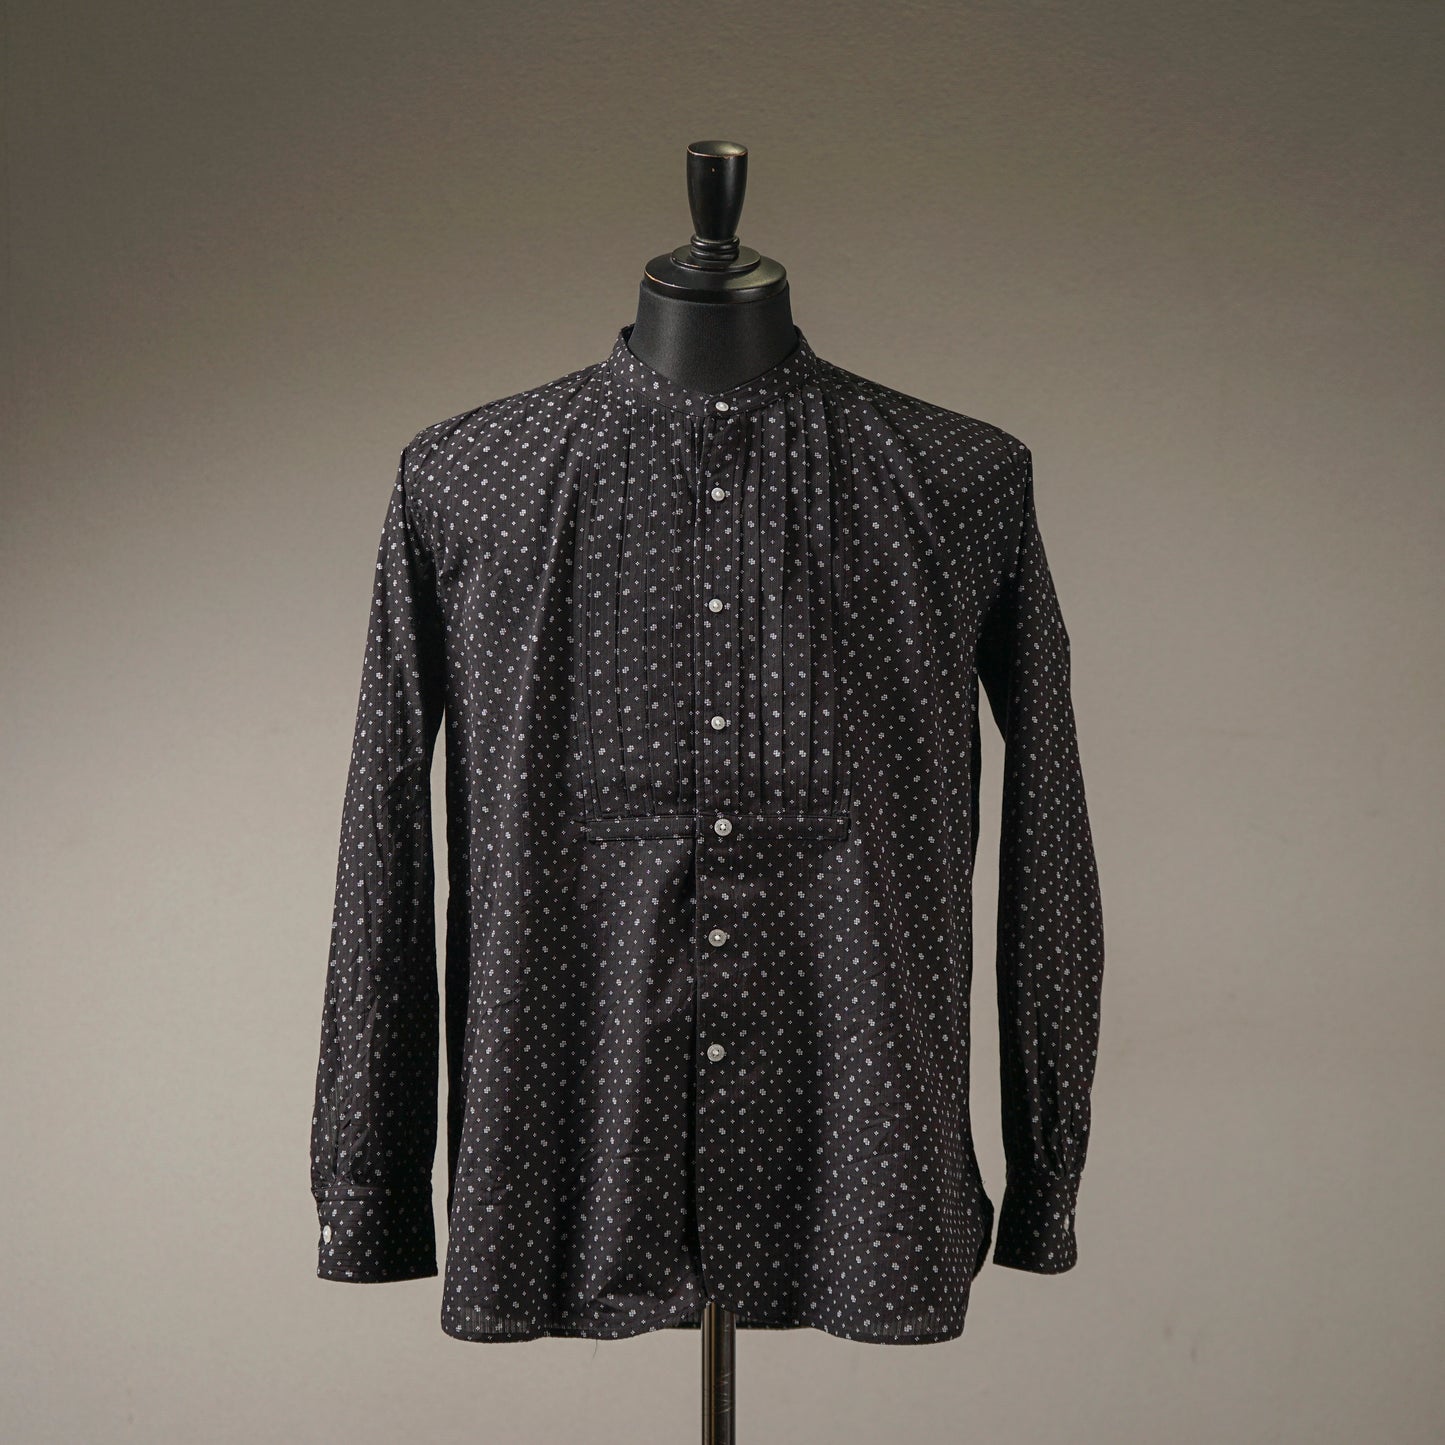 DINNER - L/S STAND COLLAR SHIRTS / BYGH-22-AW-14